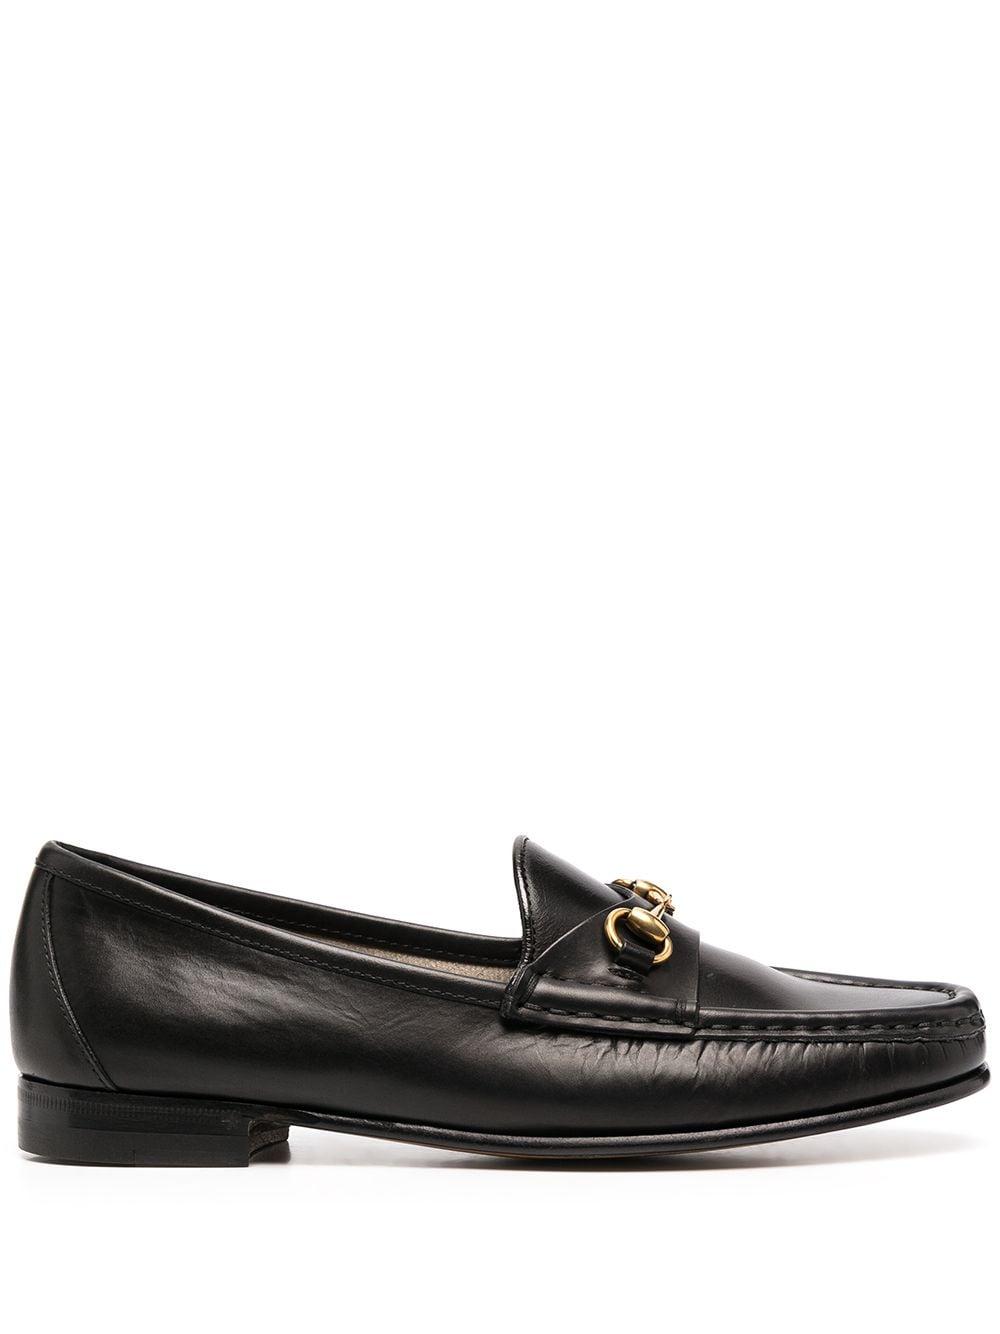 Gucci 1953 Horsebit Loafer In Leather in Black - Save 17% | Lyst